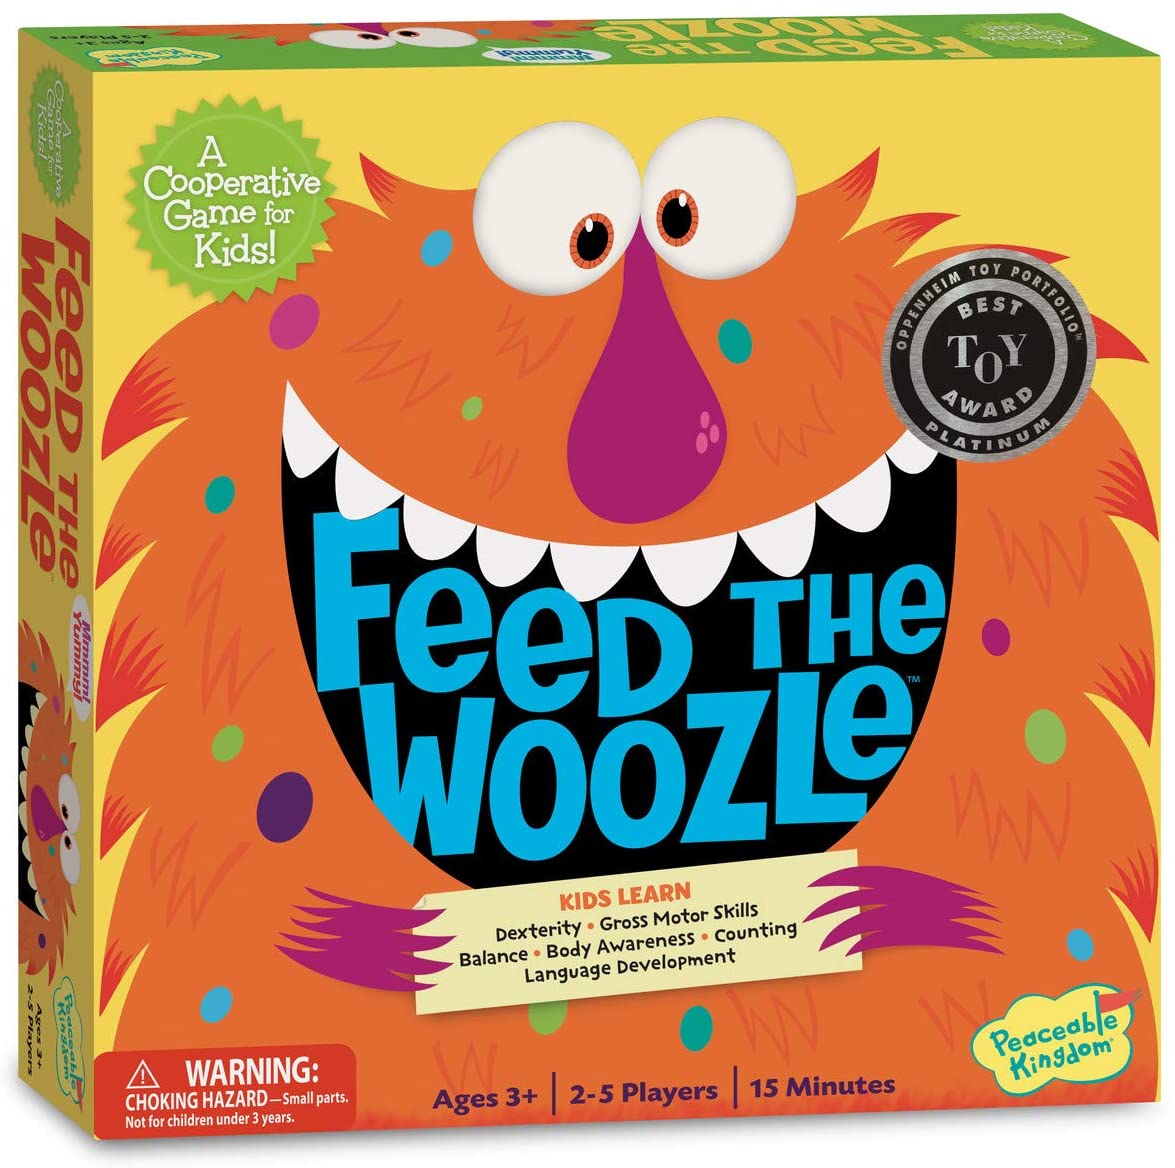 Feed the Woozle